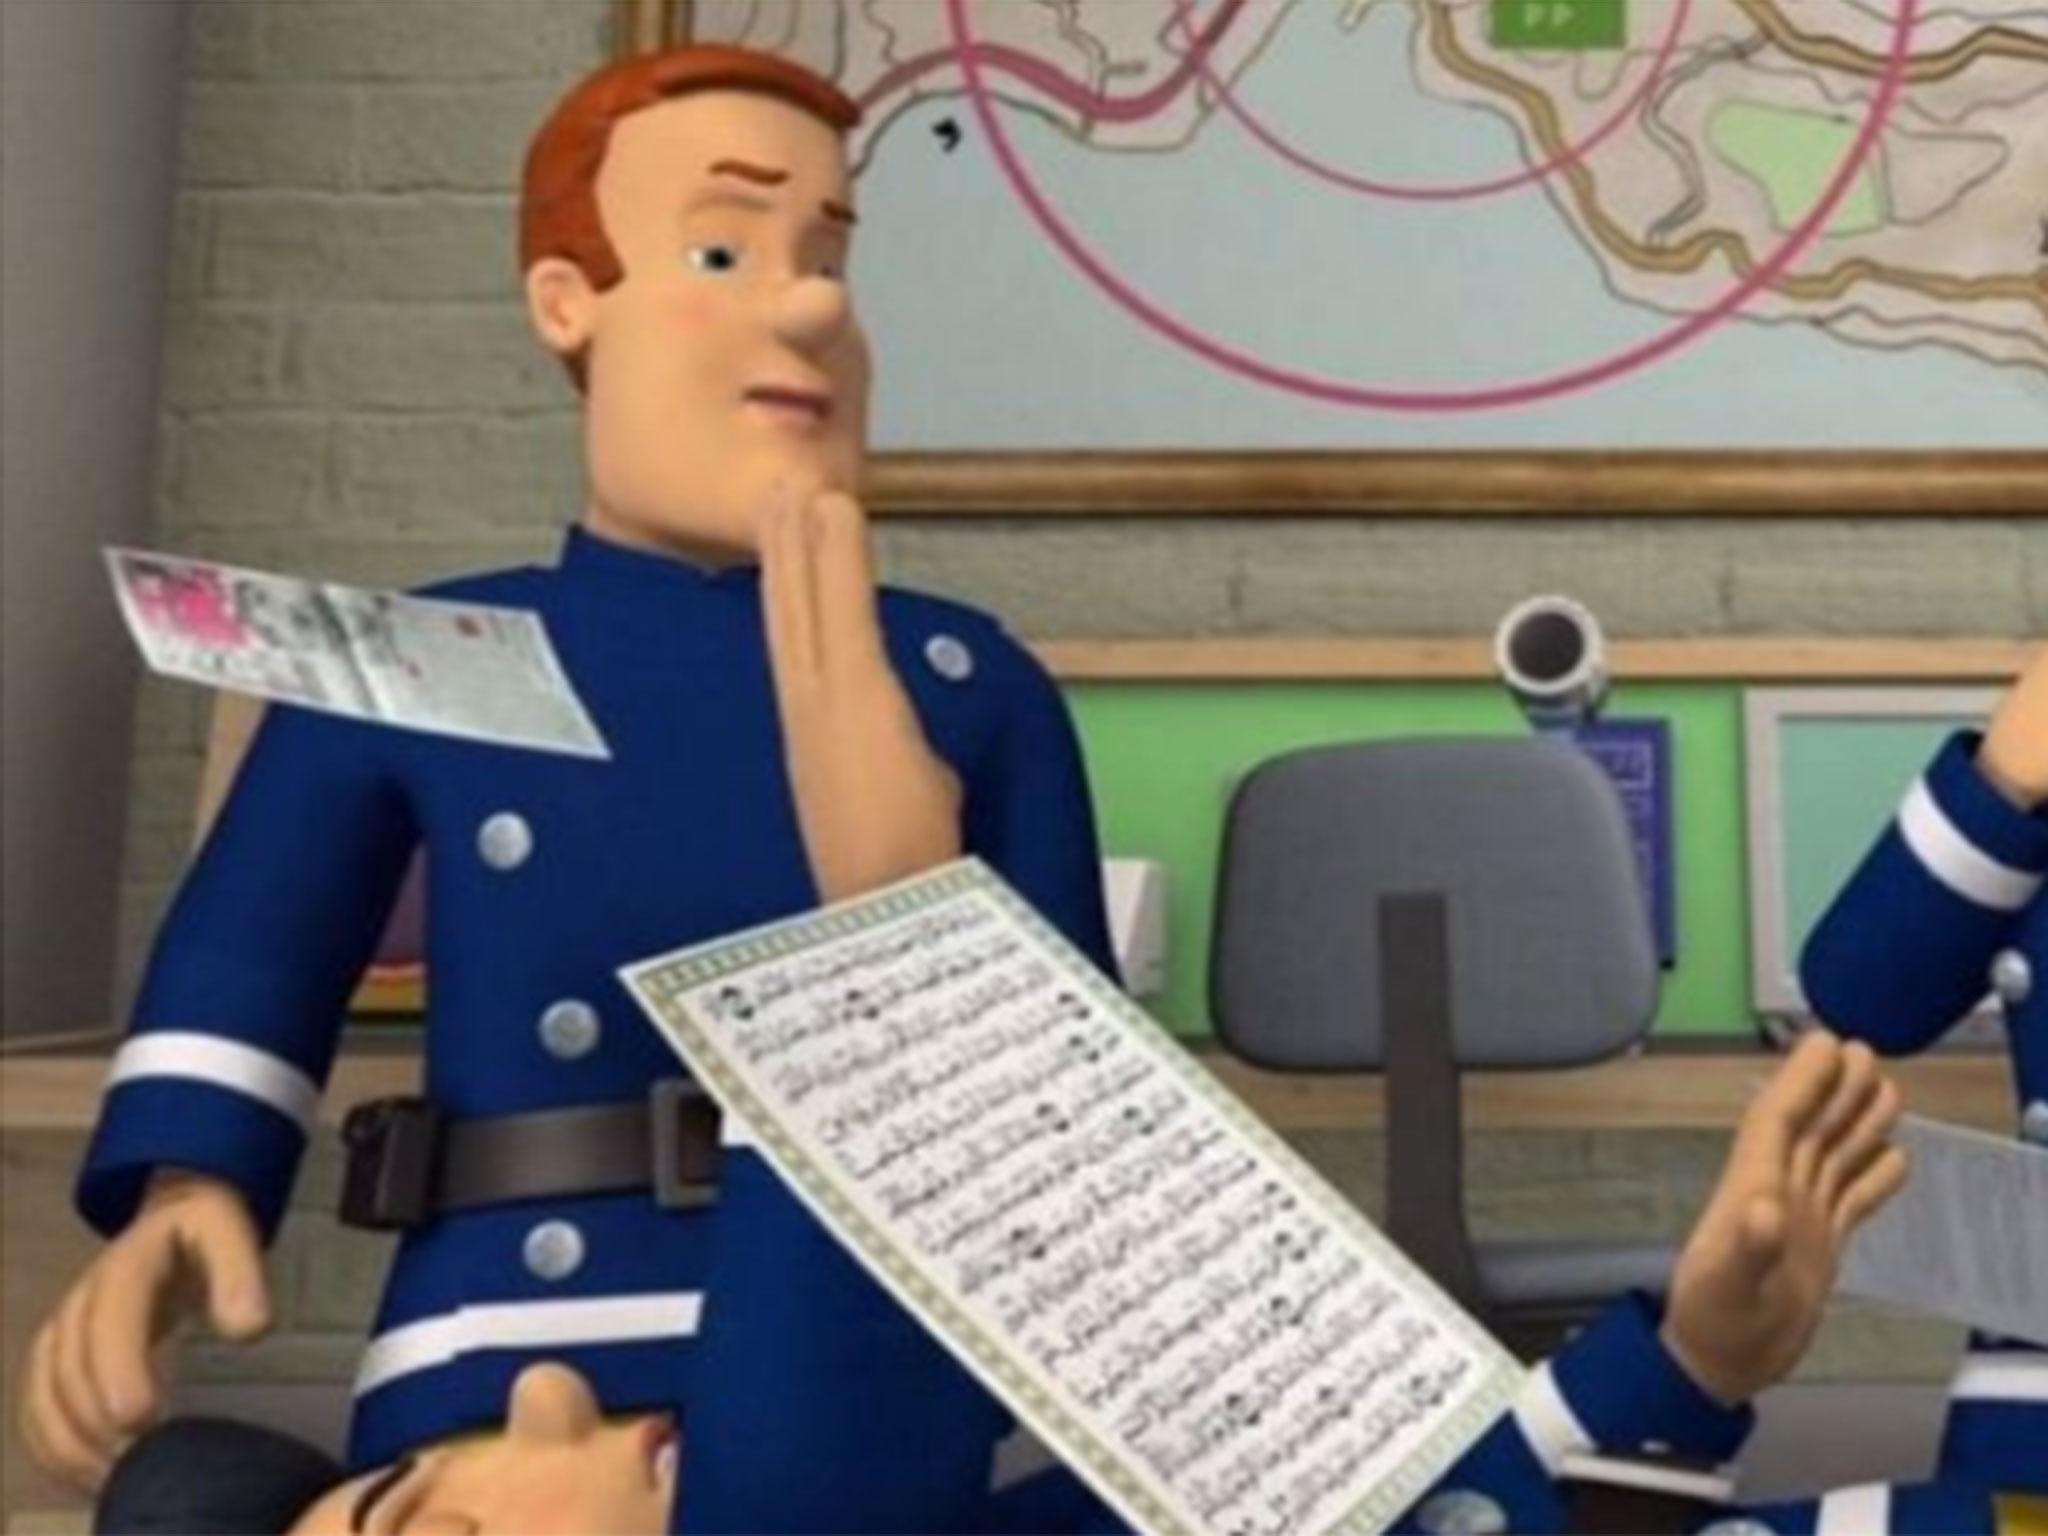 There was uproar after a character in a TV animation apparently slipped on a page of the Koran